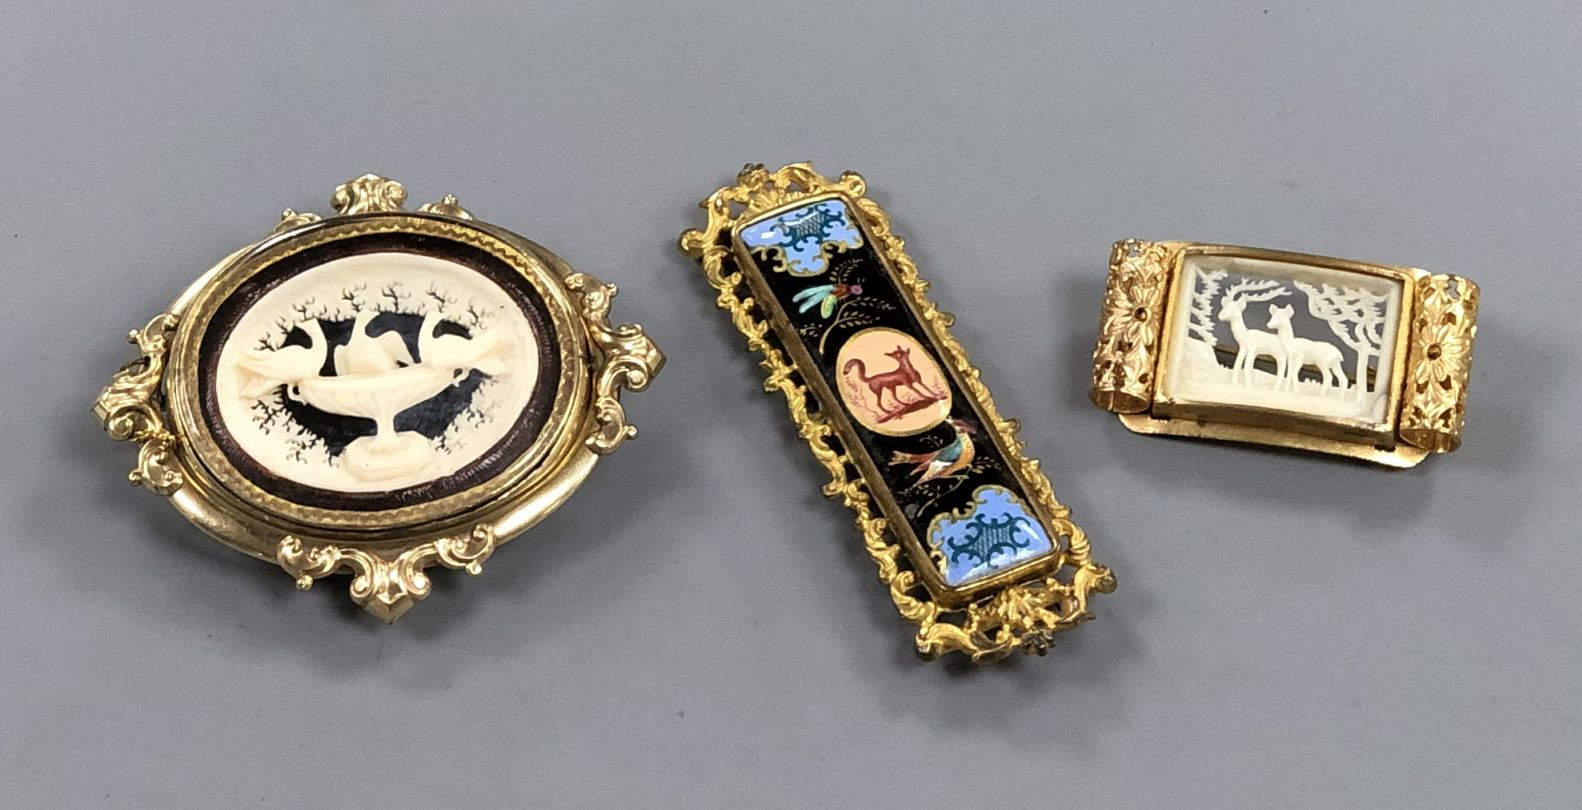 A Victorian pinchbeck 'Pliny Doves' swivelling brooch and two other gilt metal brooches including